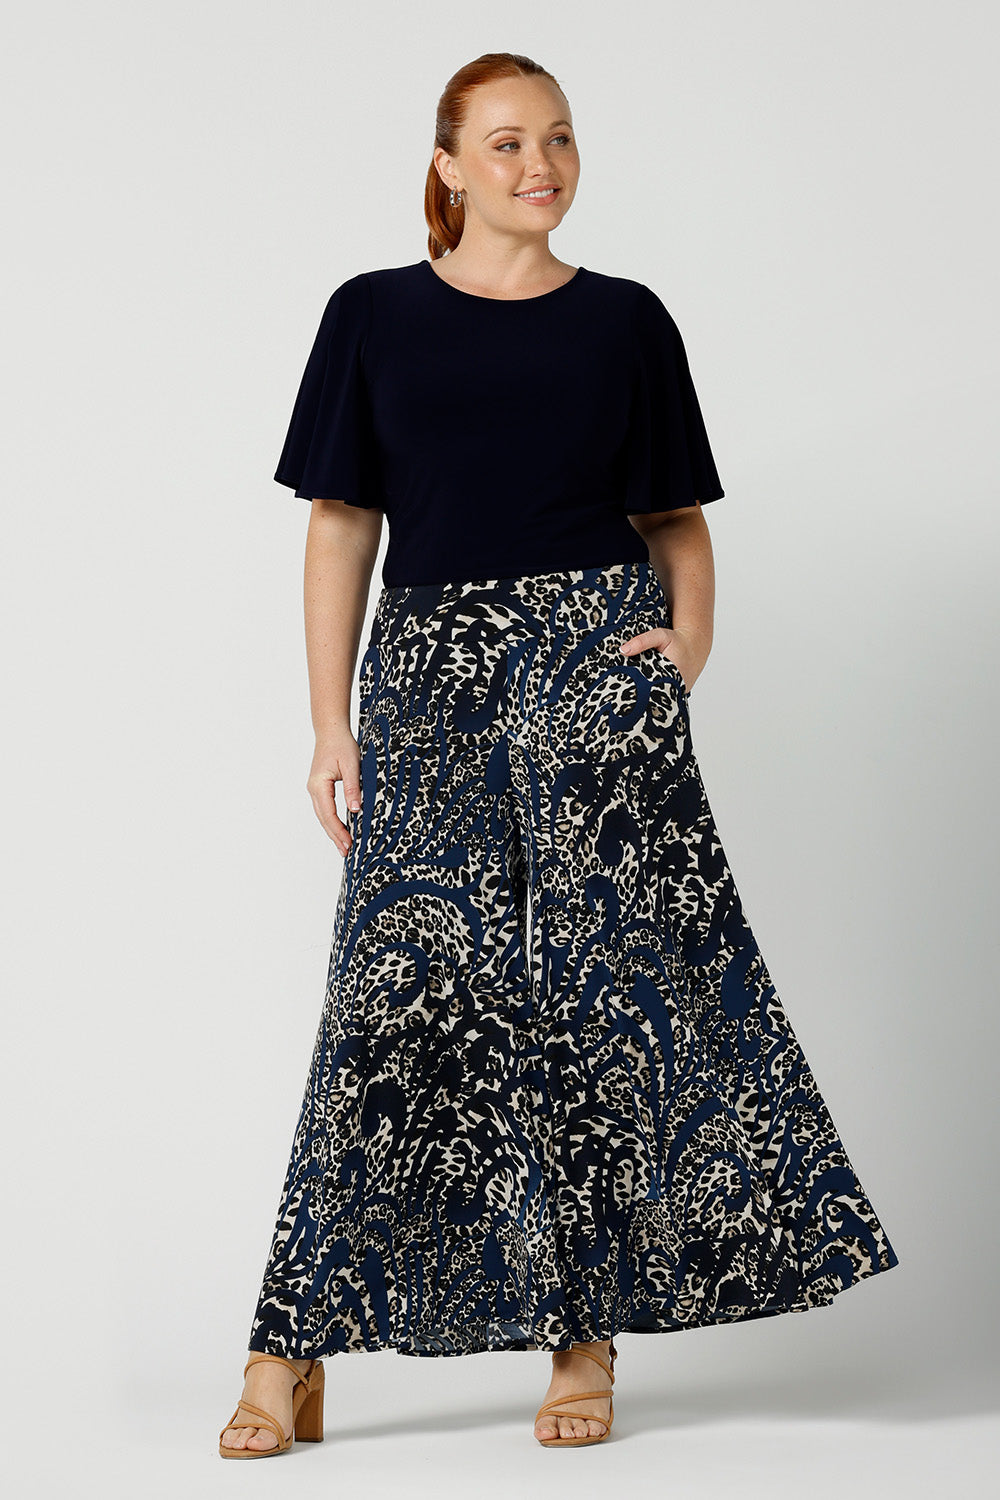 A curvy size, size 12 woman wears printed wide leg pants with pockets with a navy round neck top. These pull-on, easy care pants are comfortable for your everyday workwear capsule wardrobe. Shop these Australian-made wide leg trousers online in sizes 8 to 24, petite to plus sizes.